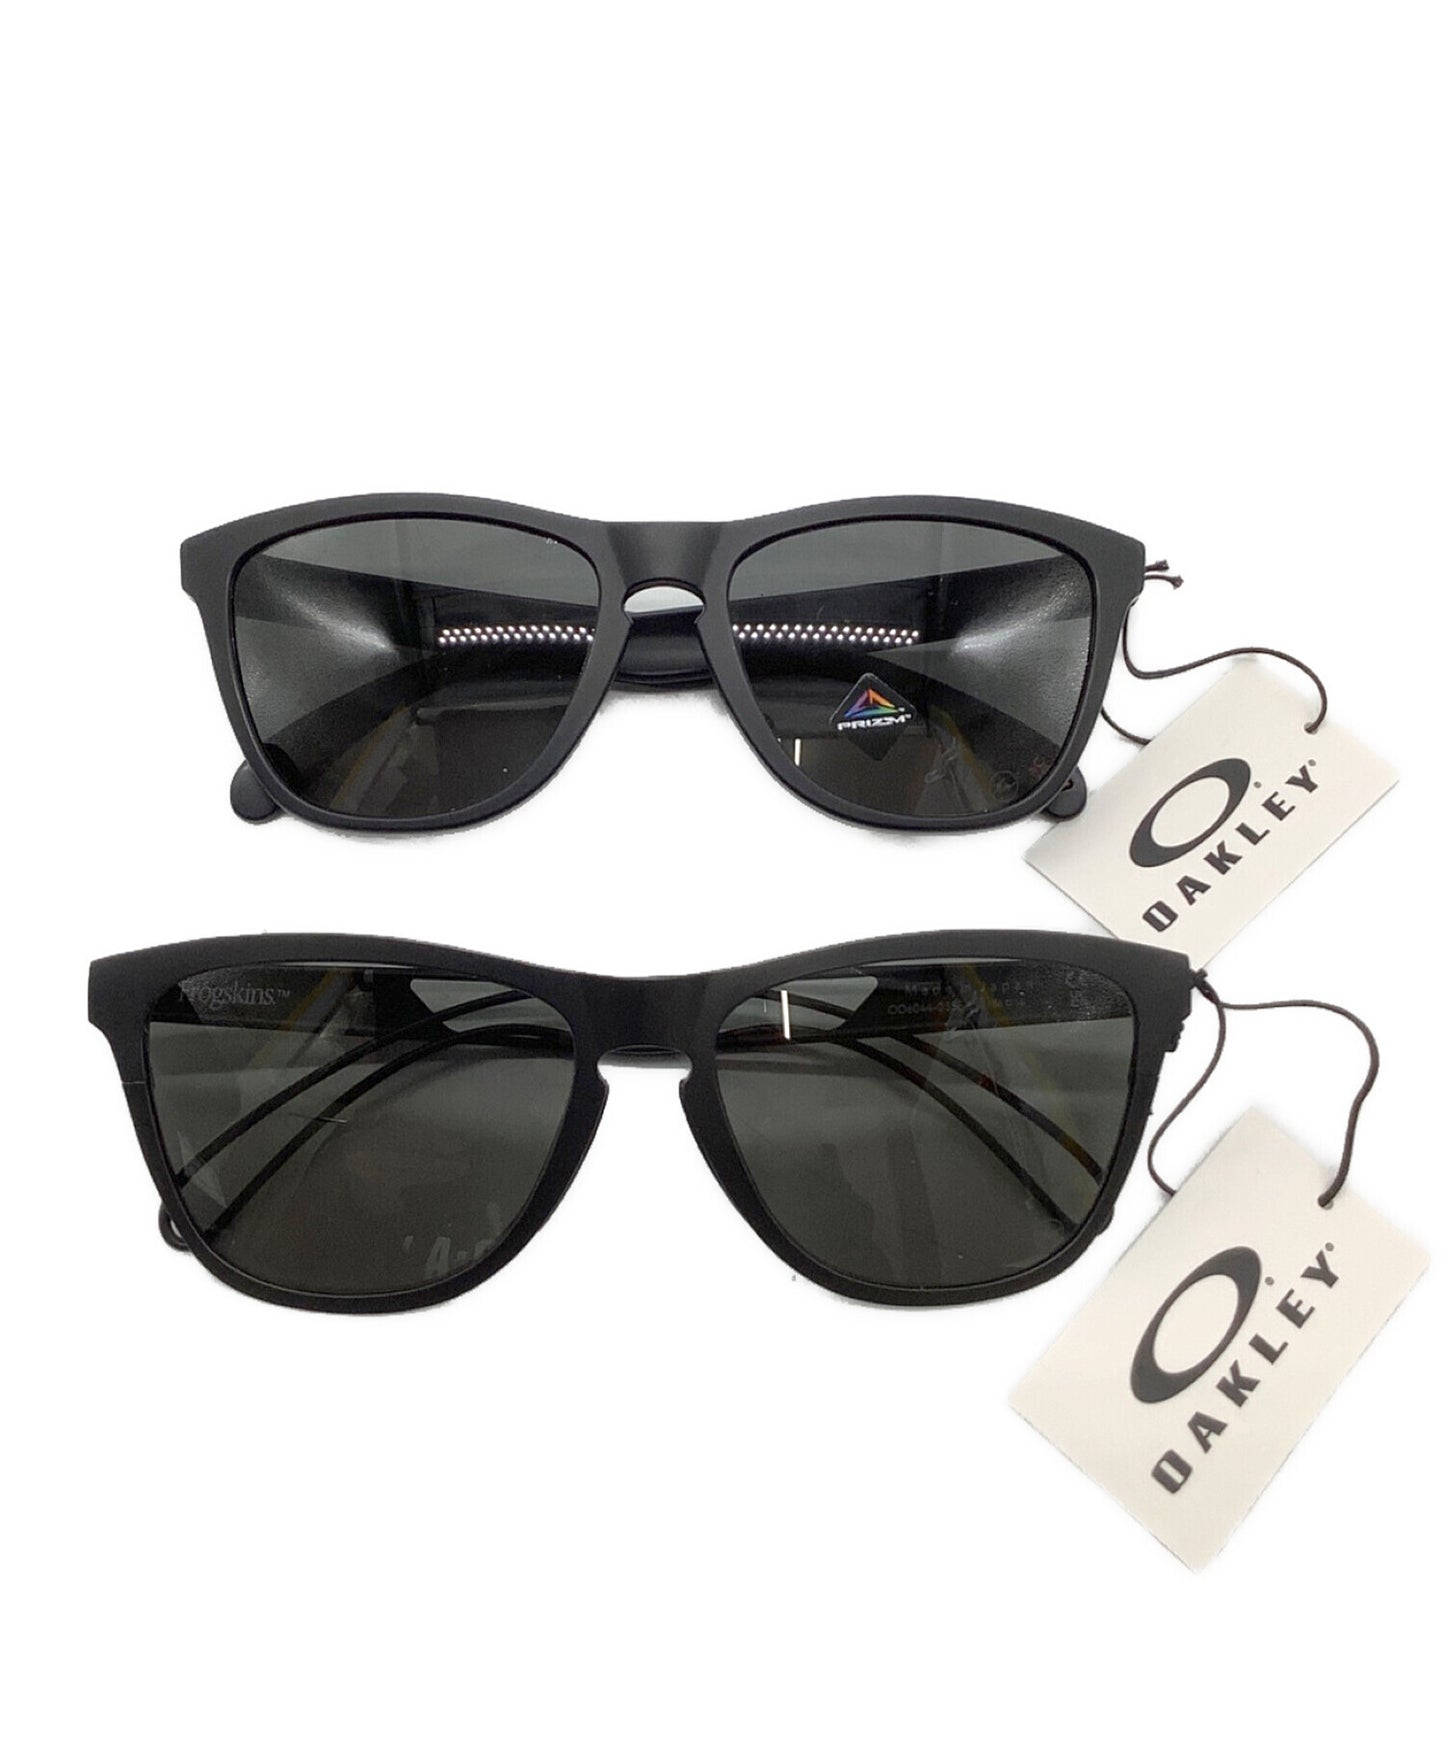 OAKLEY x fragment design sunglasses 0OO6044 | Archive Factory